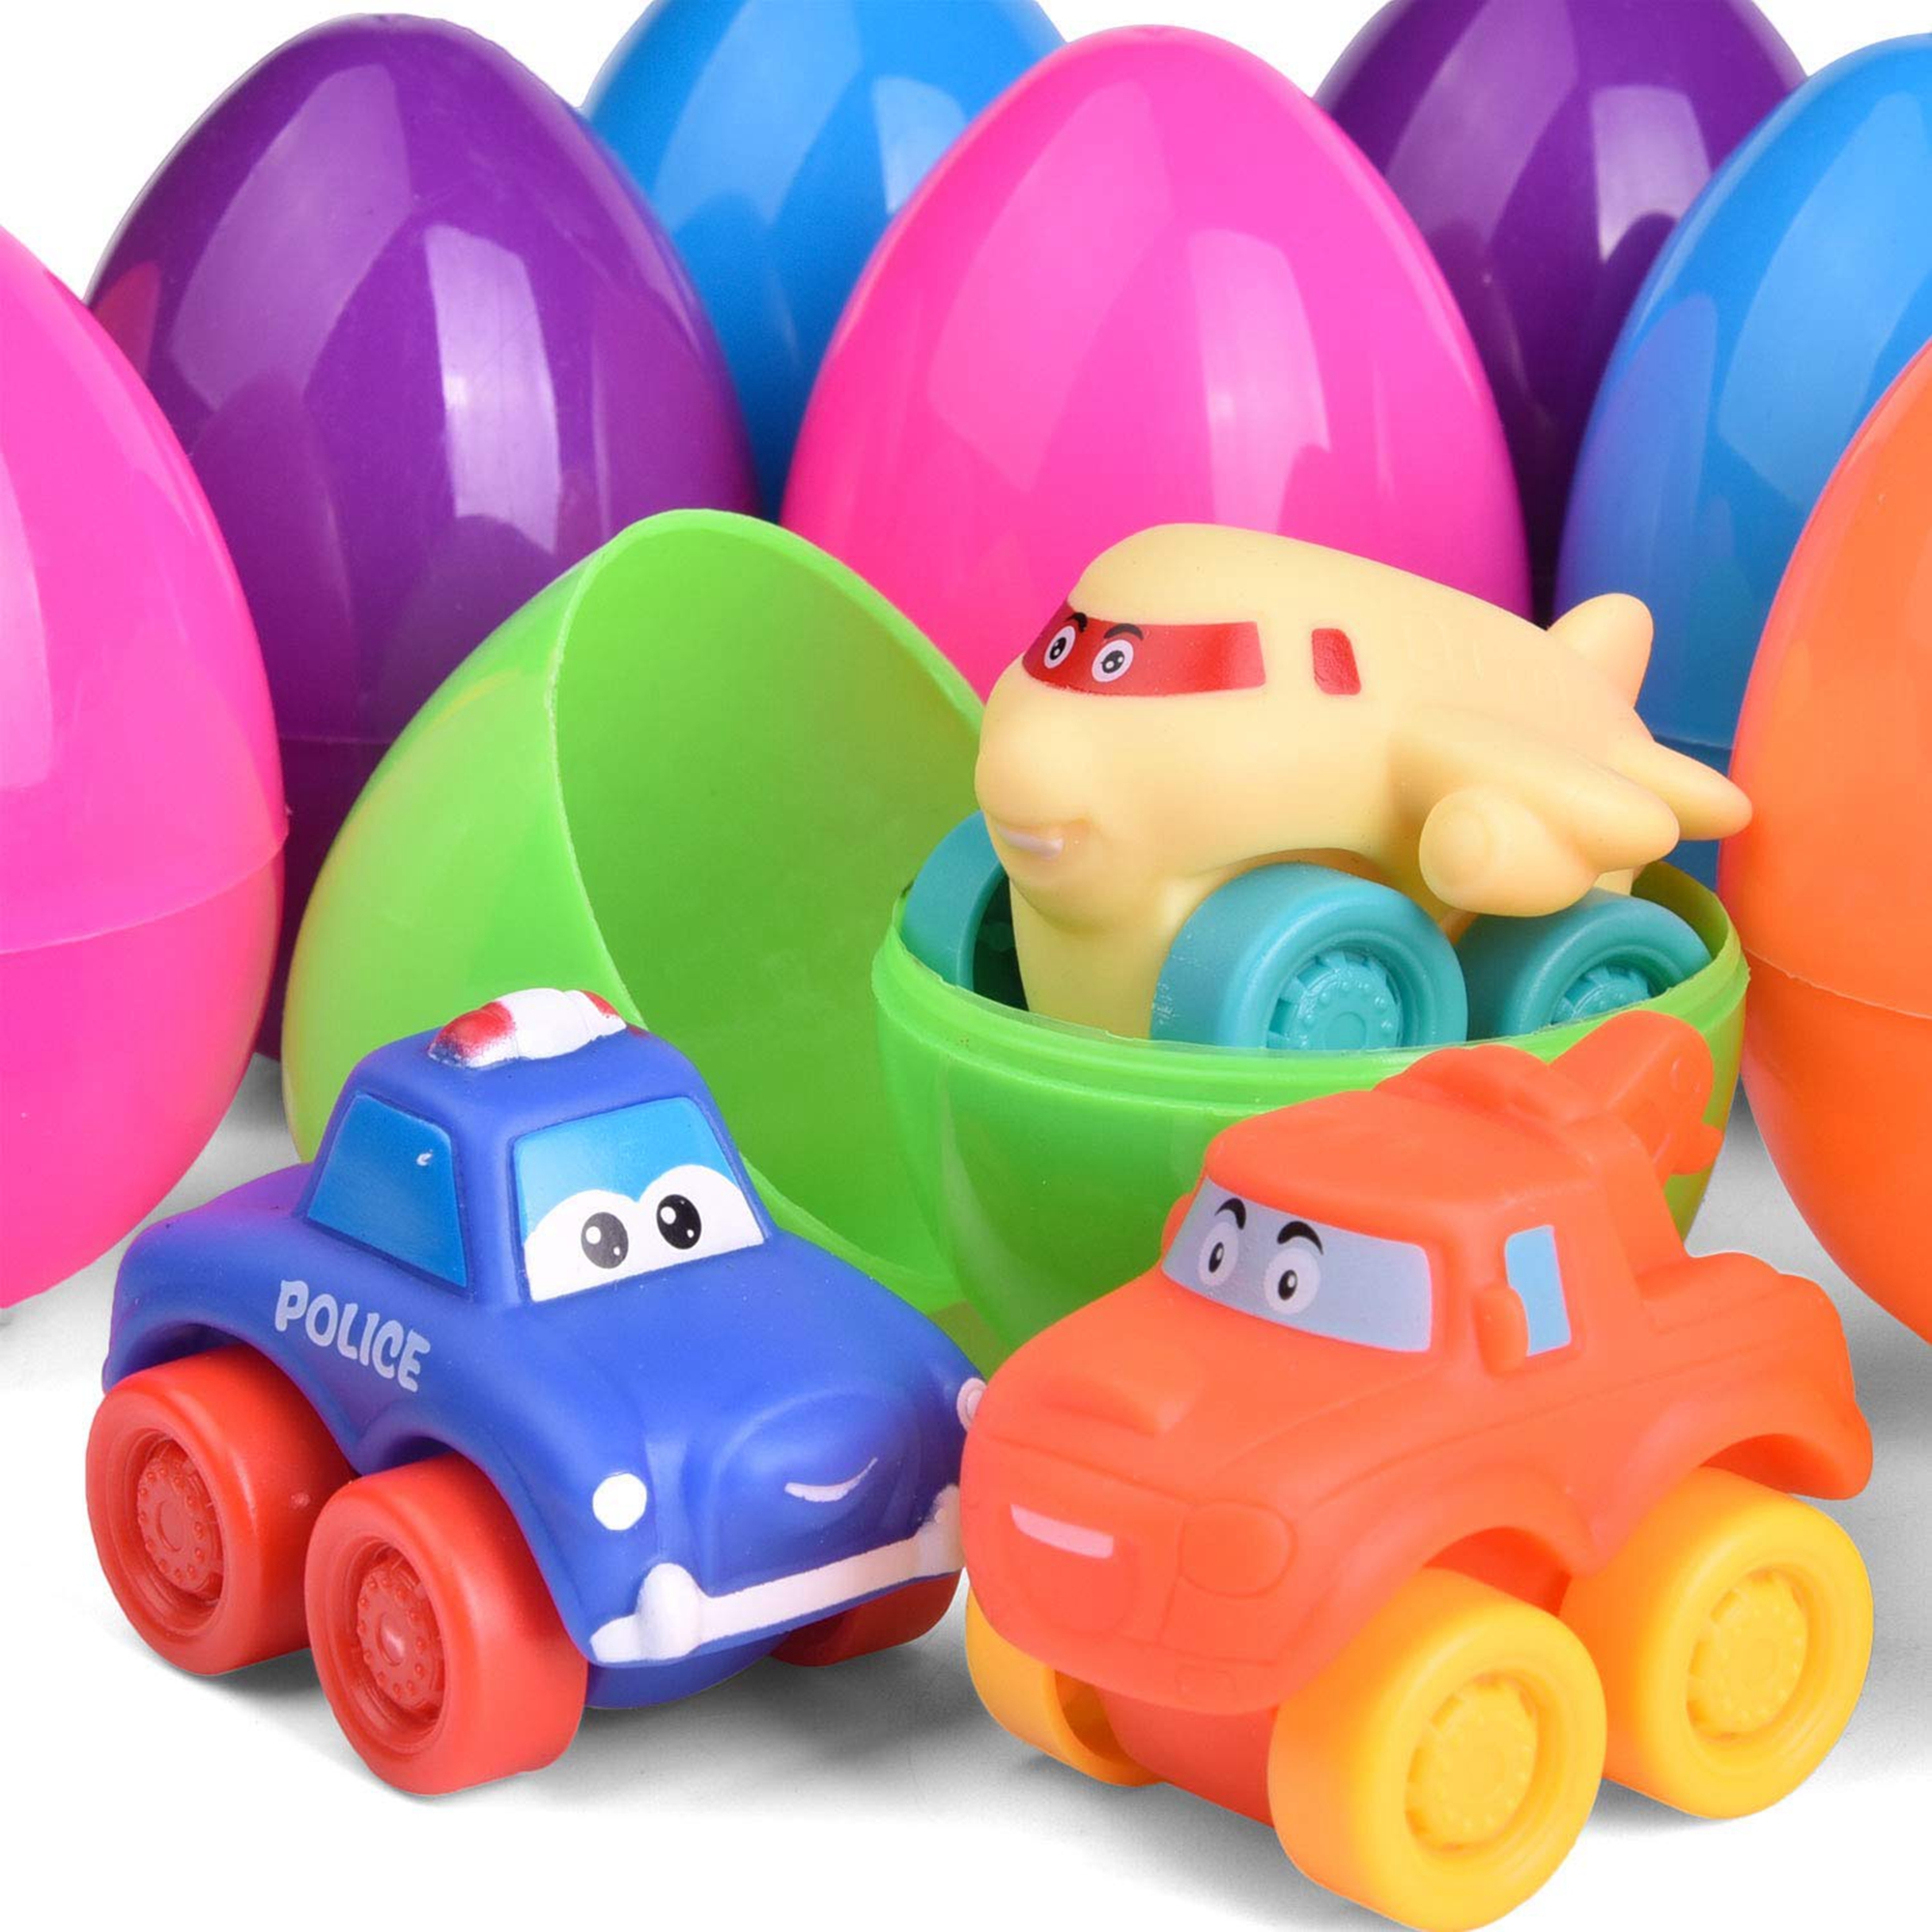 18 Pcs Easter Eggs Prefilled with Baby Cars for Easter Basket Stuffers, Soft Rubber Toy Vehicles for Baby Easter Gifts F-551 - image 3 of 4